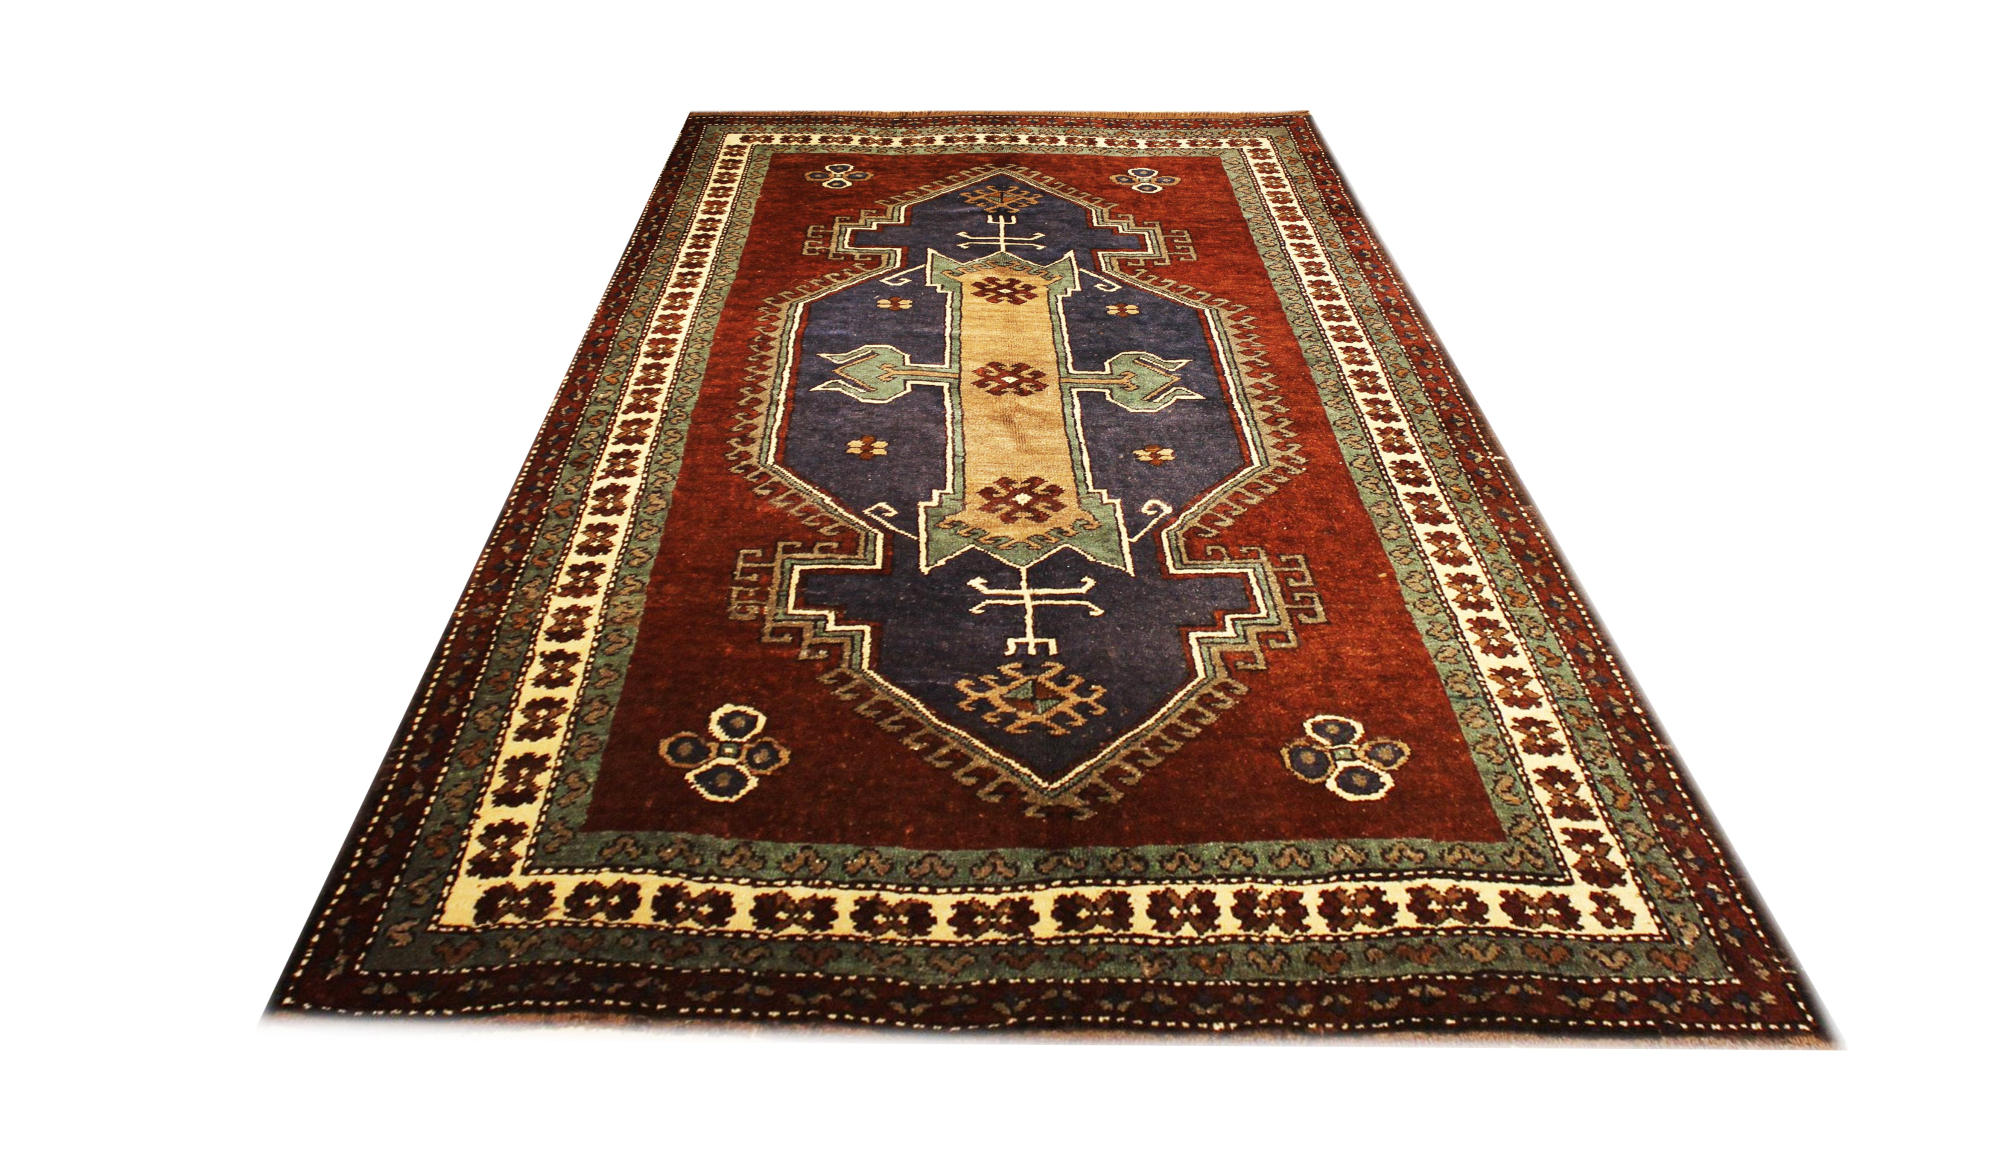 Area rug for living space and any room. Floor decor, rugs and carpets from Tabrizi Rugs. Kazak - 5'1